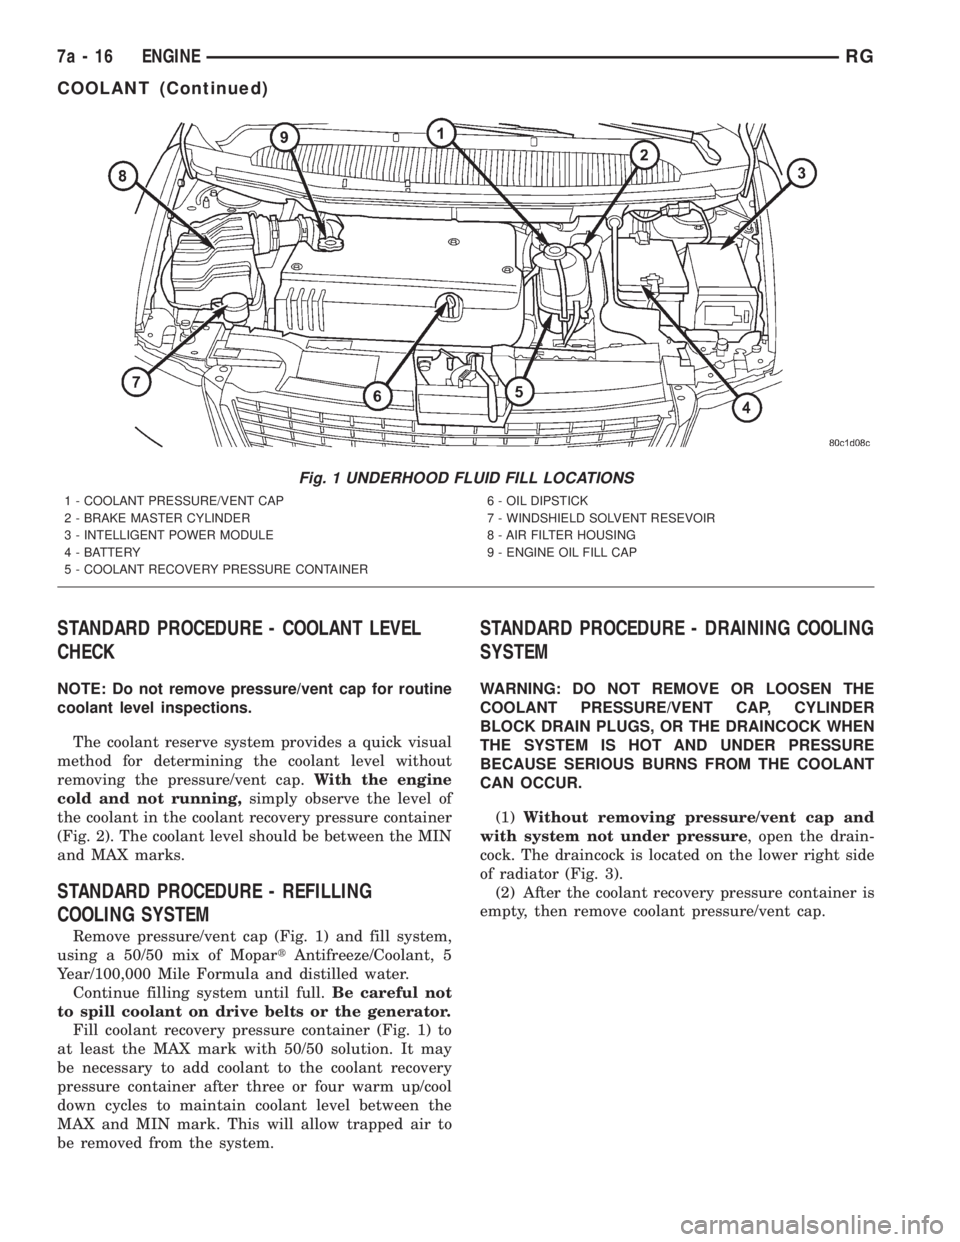 CHRYSLER VOYAGER 2001  Service Manual STANDARD PROCEDURE - COOLANT LEVEL
CHECK
NOTE: Do not remove pressure/vent cap for routine
coolant level inspections.
The coolant reserve system provides a quick visual
method for determining the cool